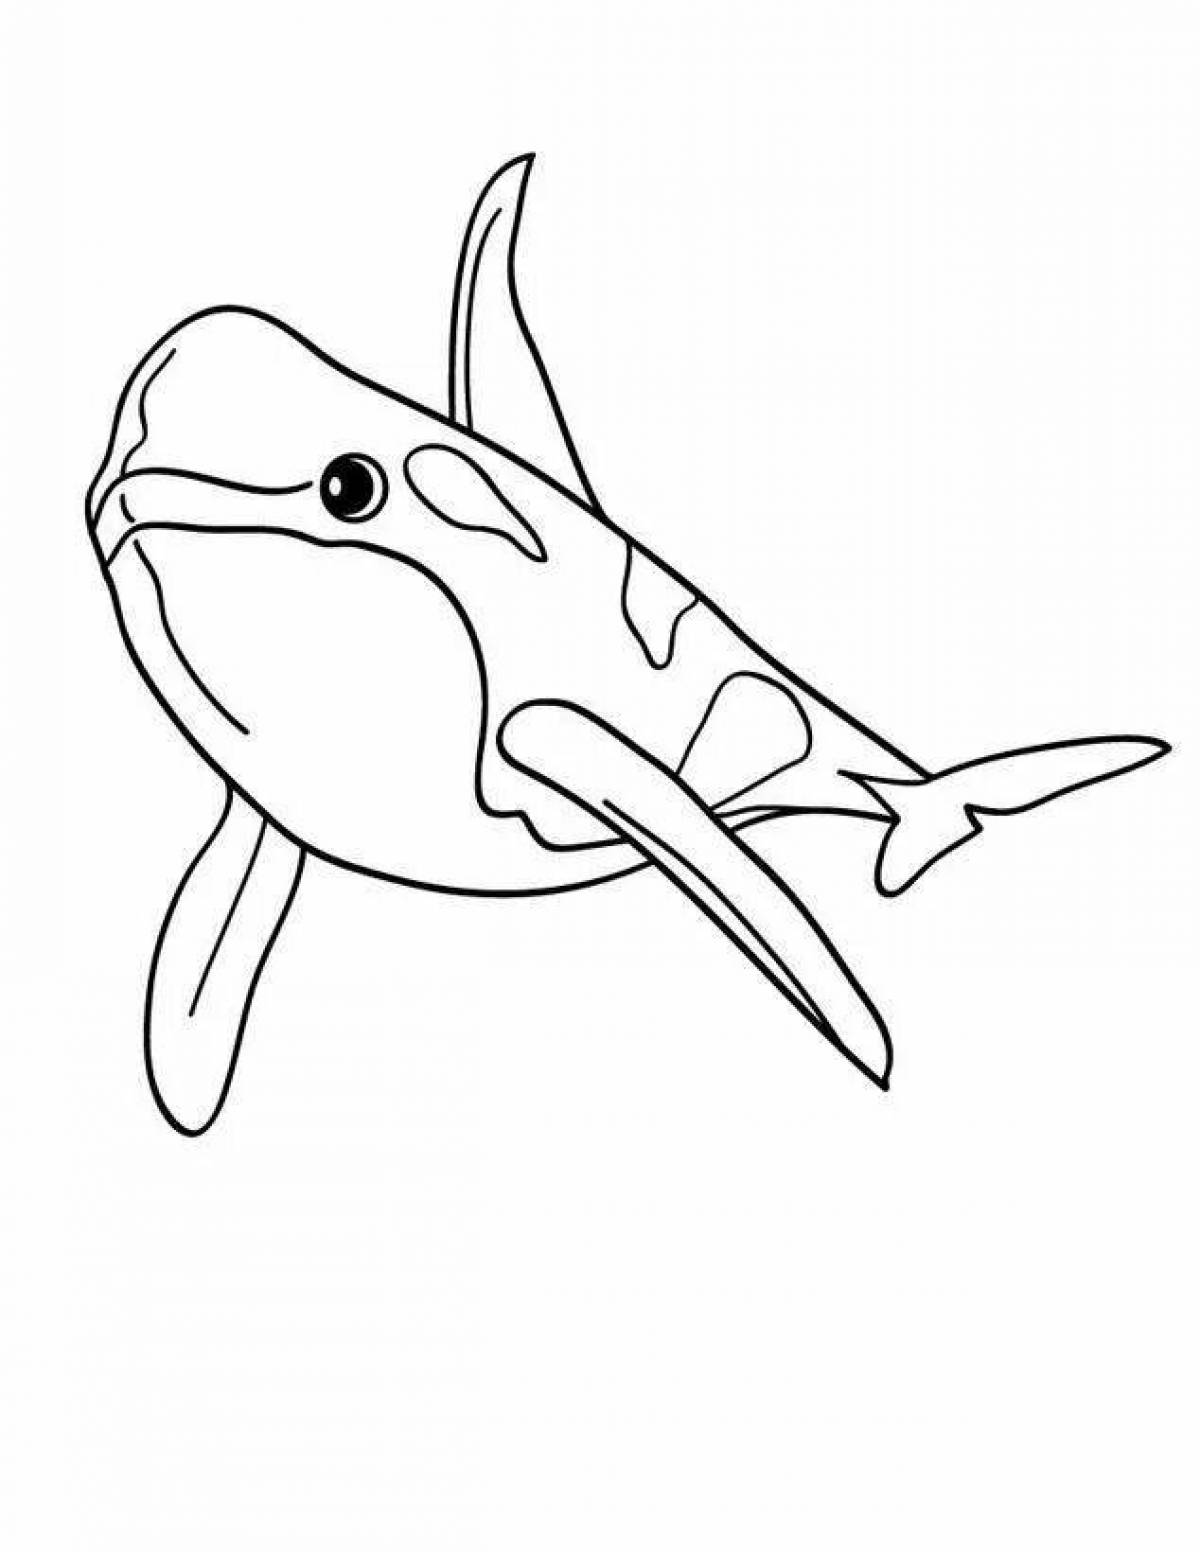 Glorious killer whale coloring page